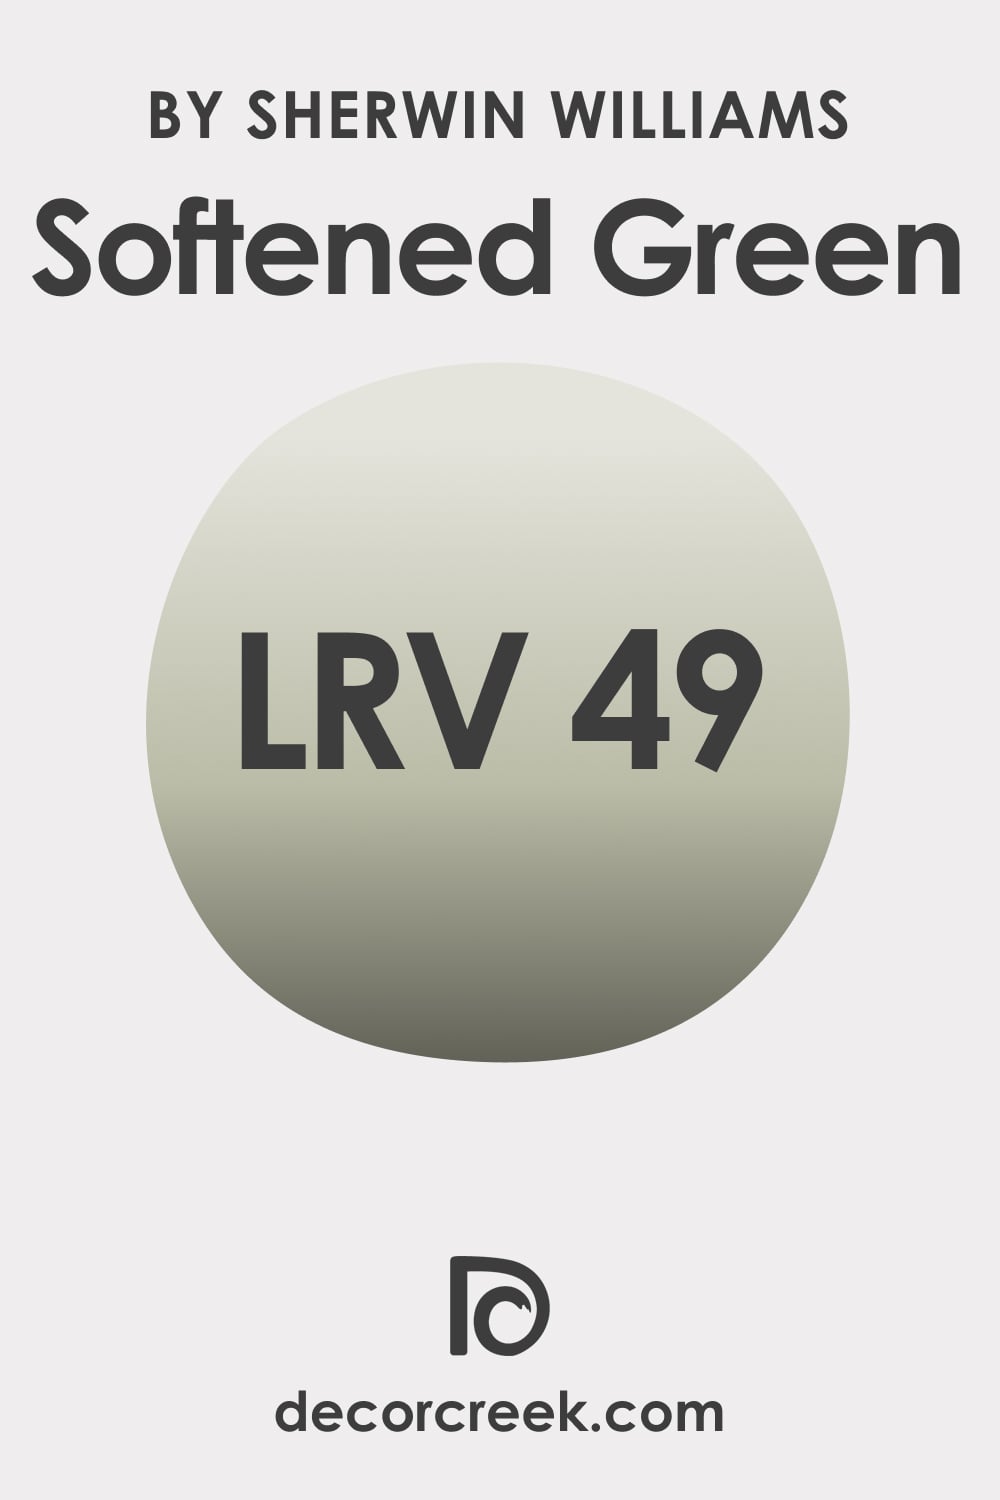 What LRV Does SW Softened Green Have?